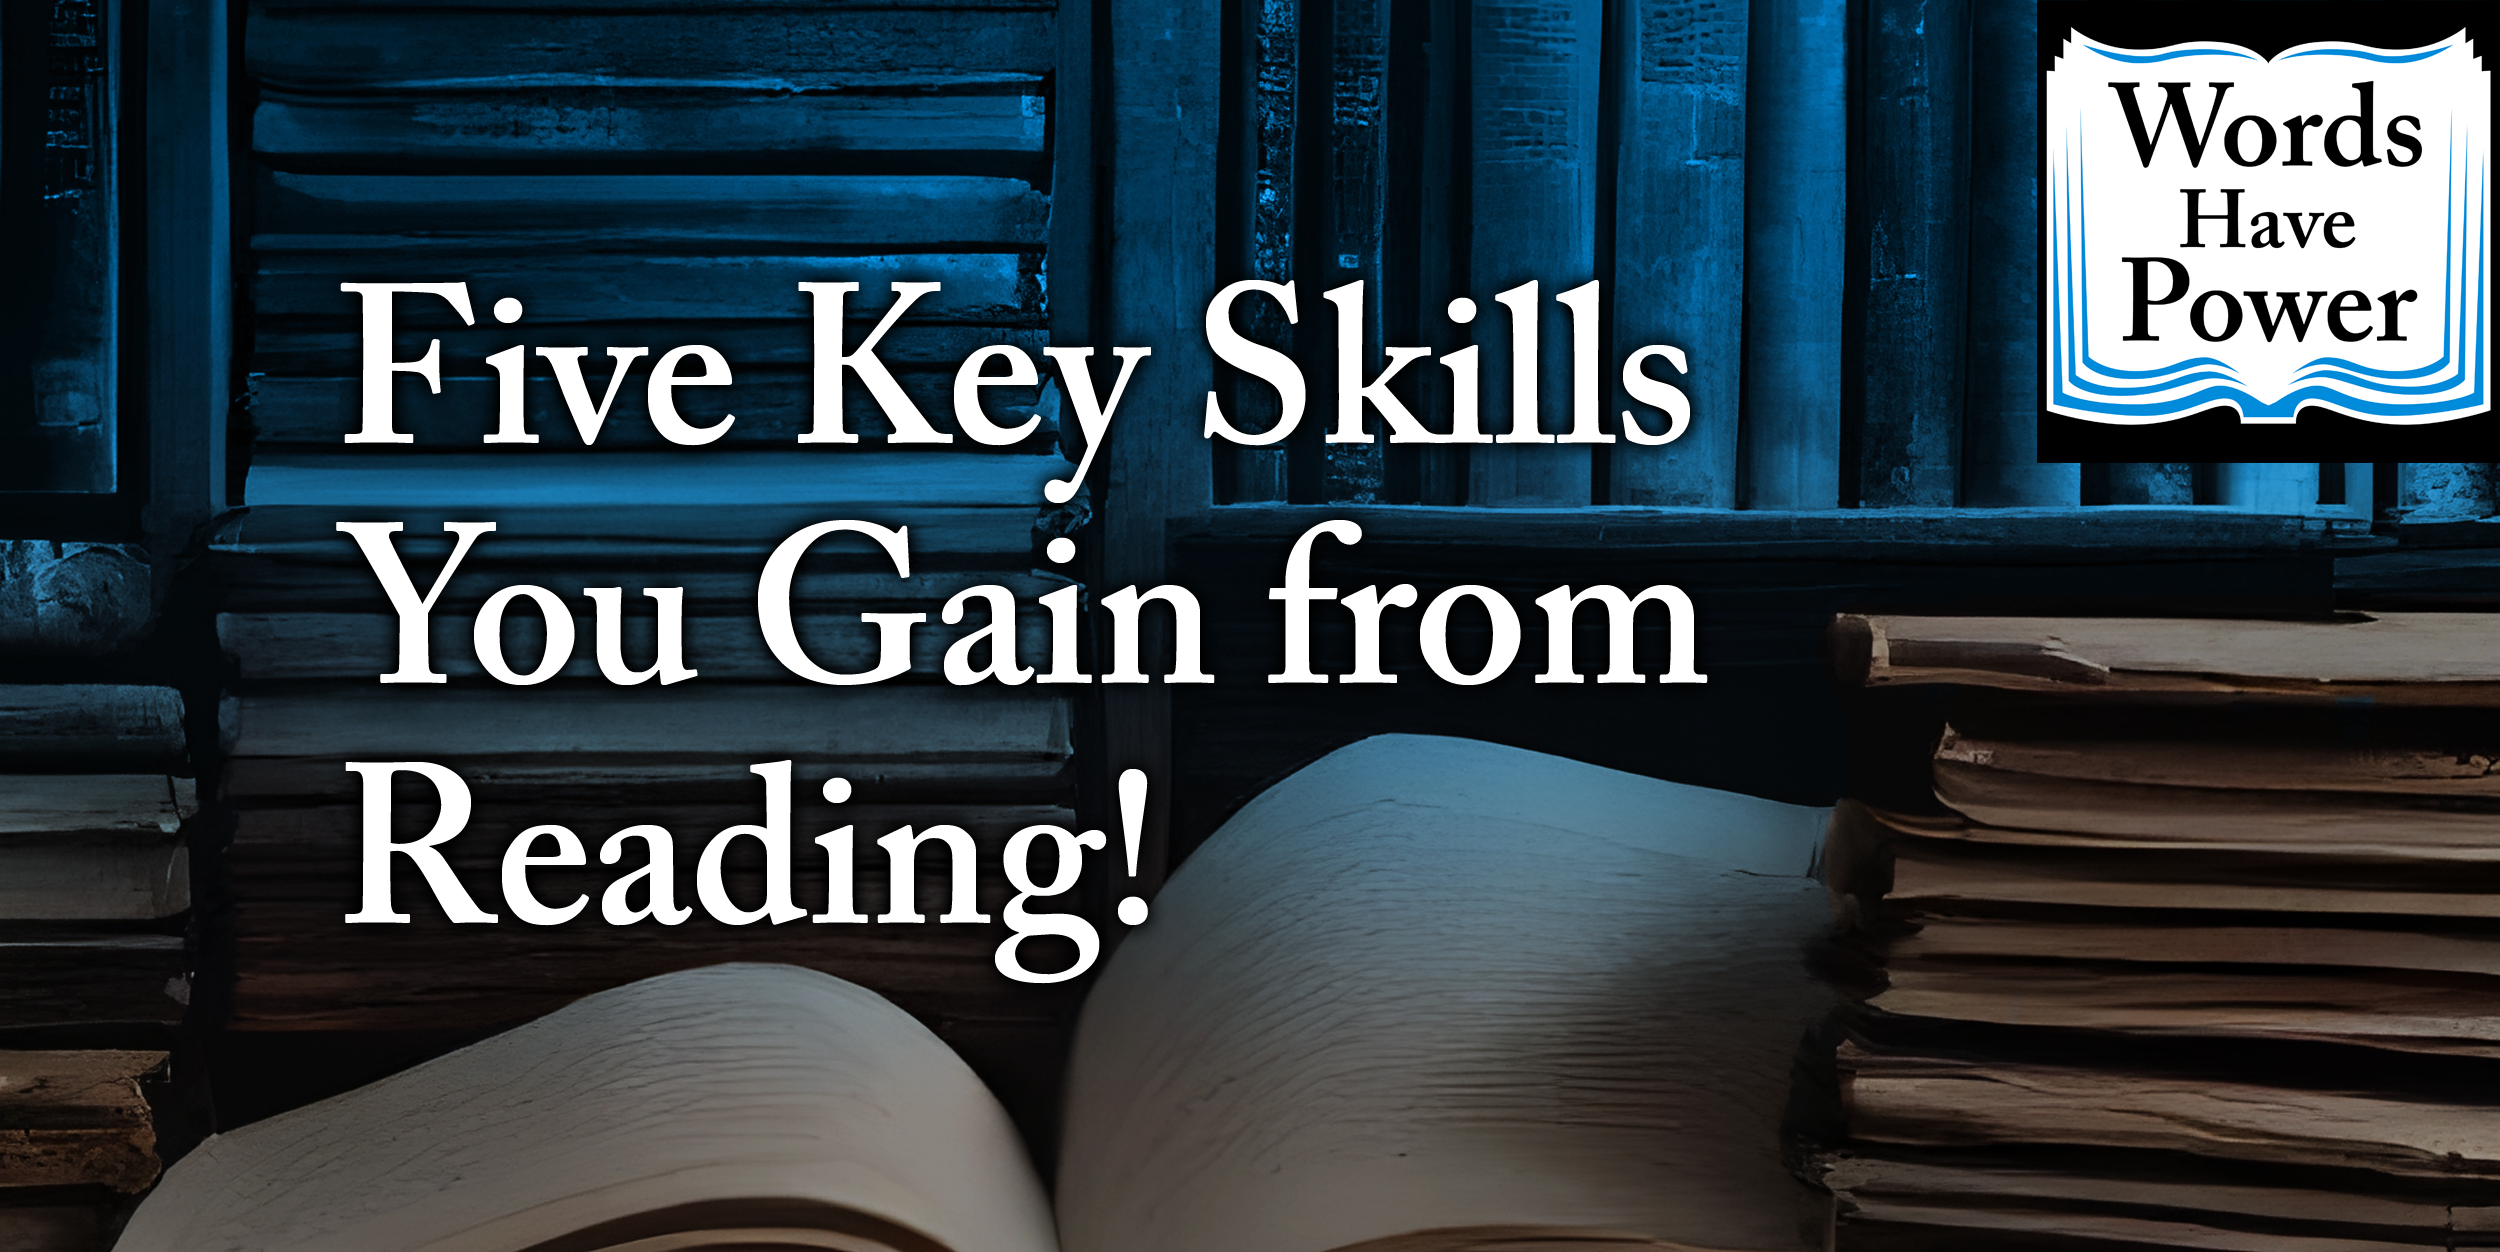 Five Key Skills You Gain from Reading! - Words Have Power Launch